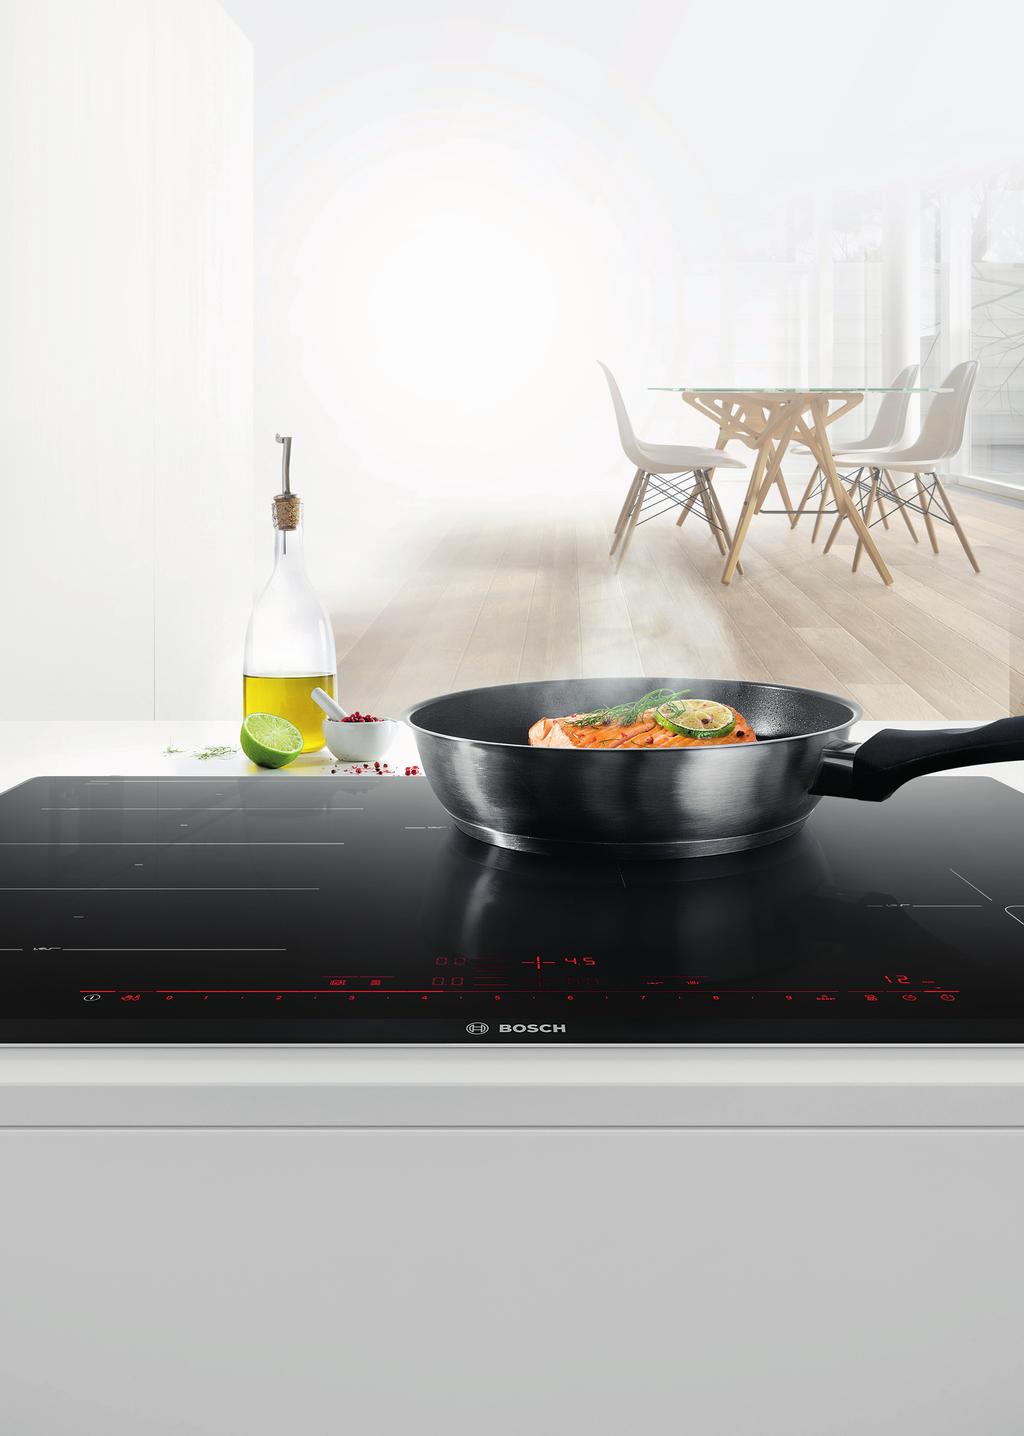 DirectSelect Premium 1 New Induction Cooktops.